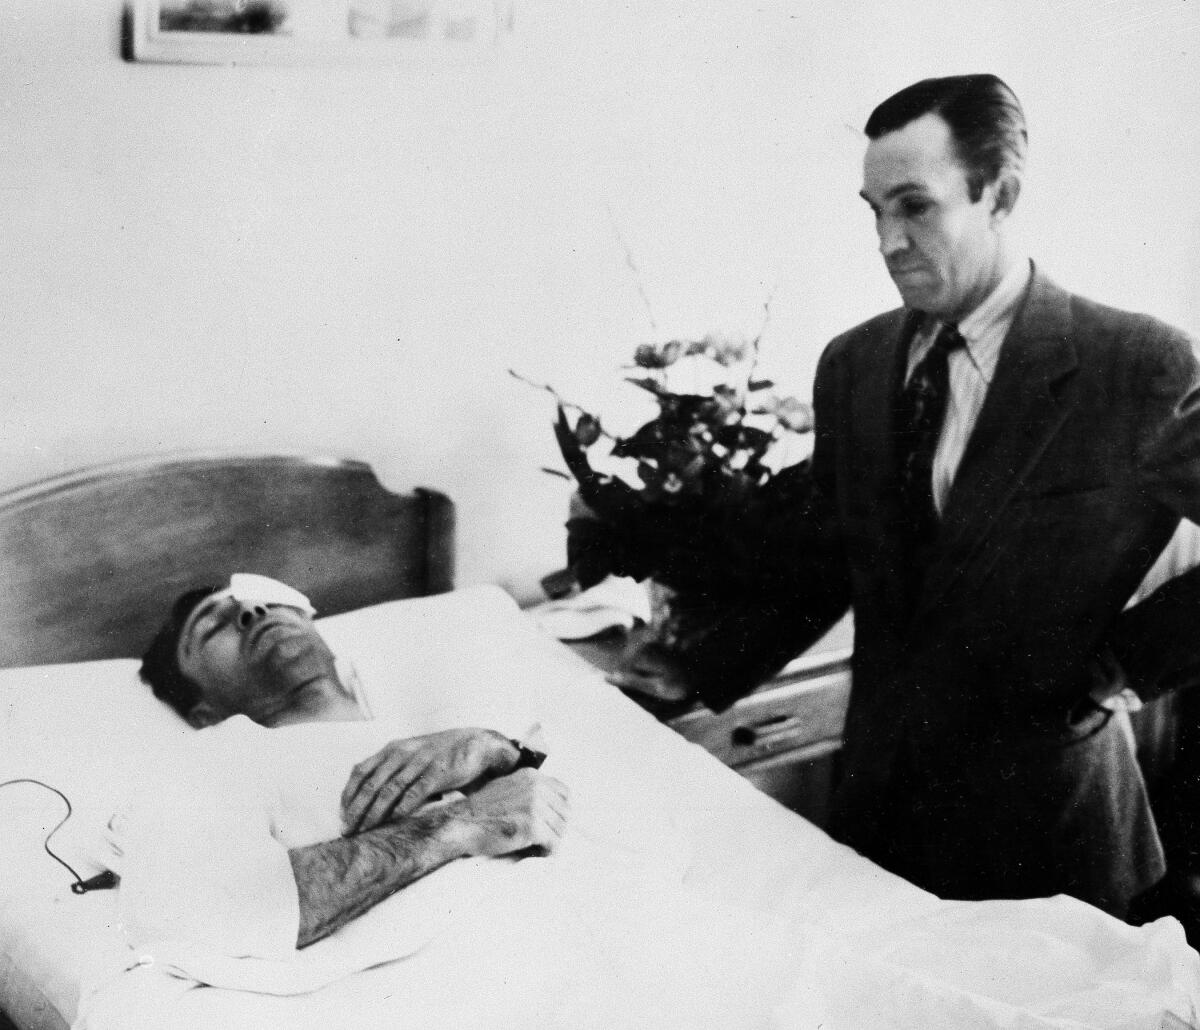 Golfer Ben Hogan lies in an El Paso, Texas, hospital as he recovers from injuries sustained in a car crash.